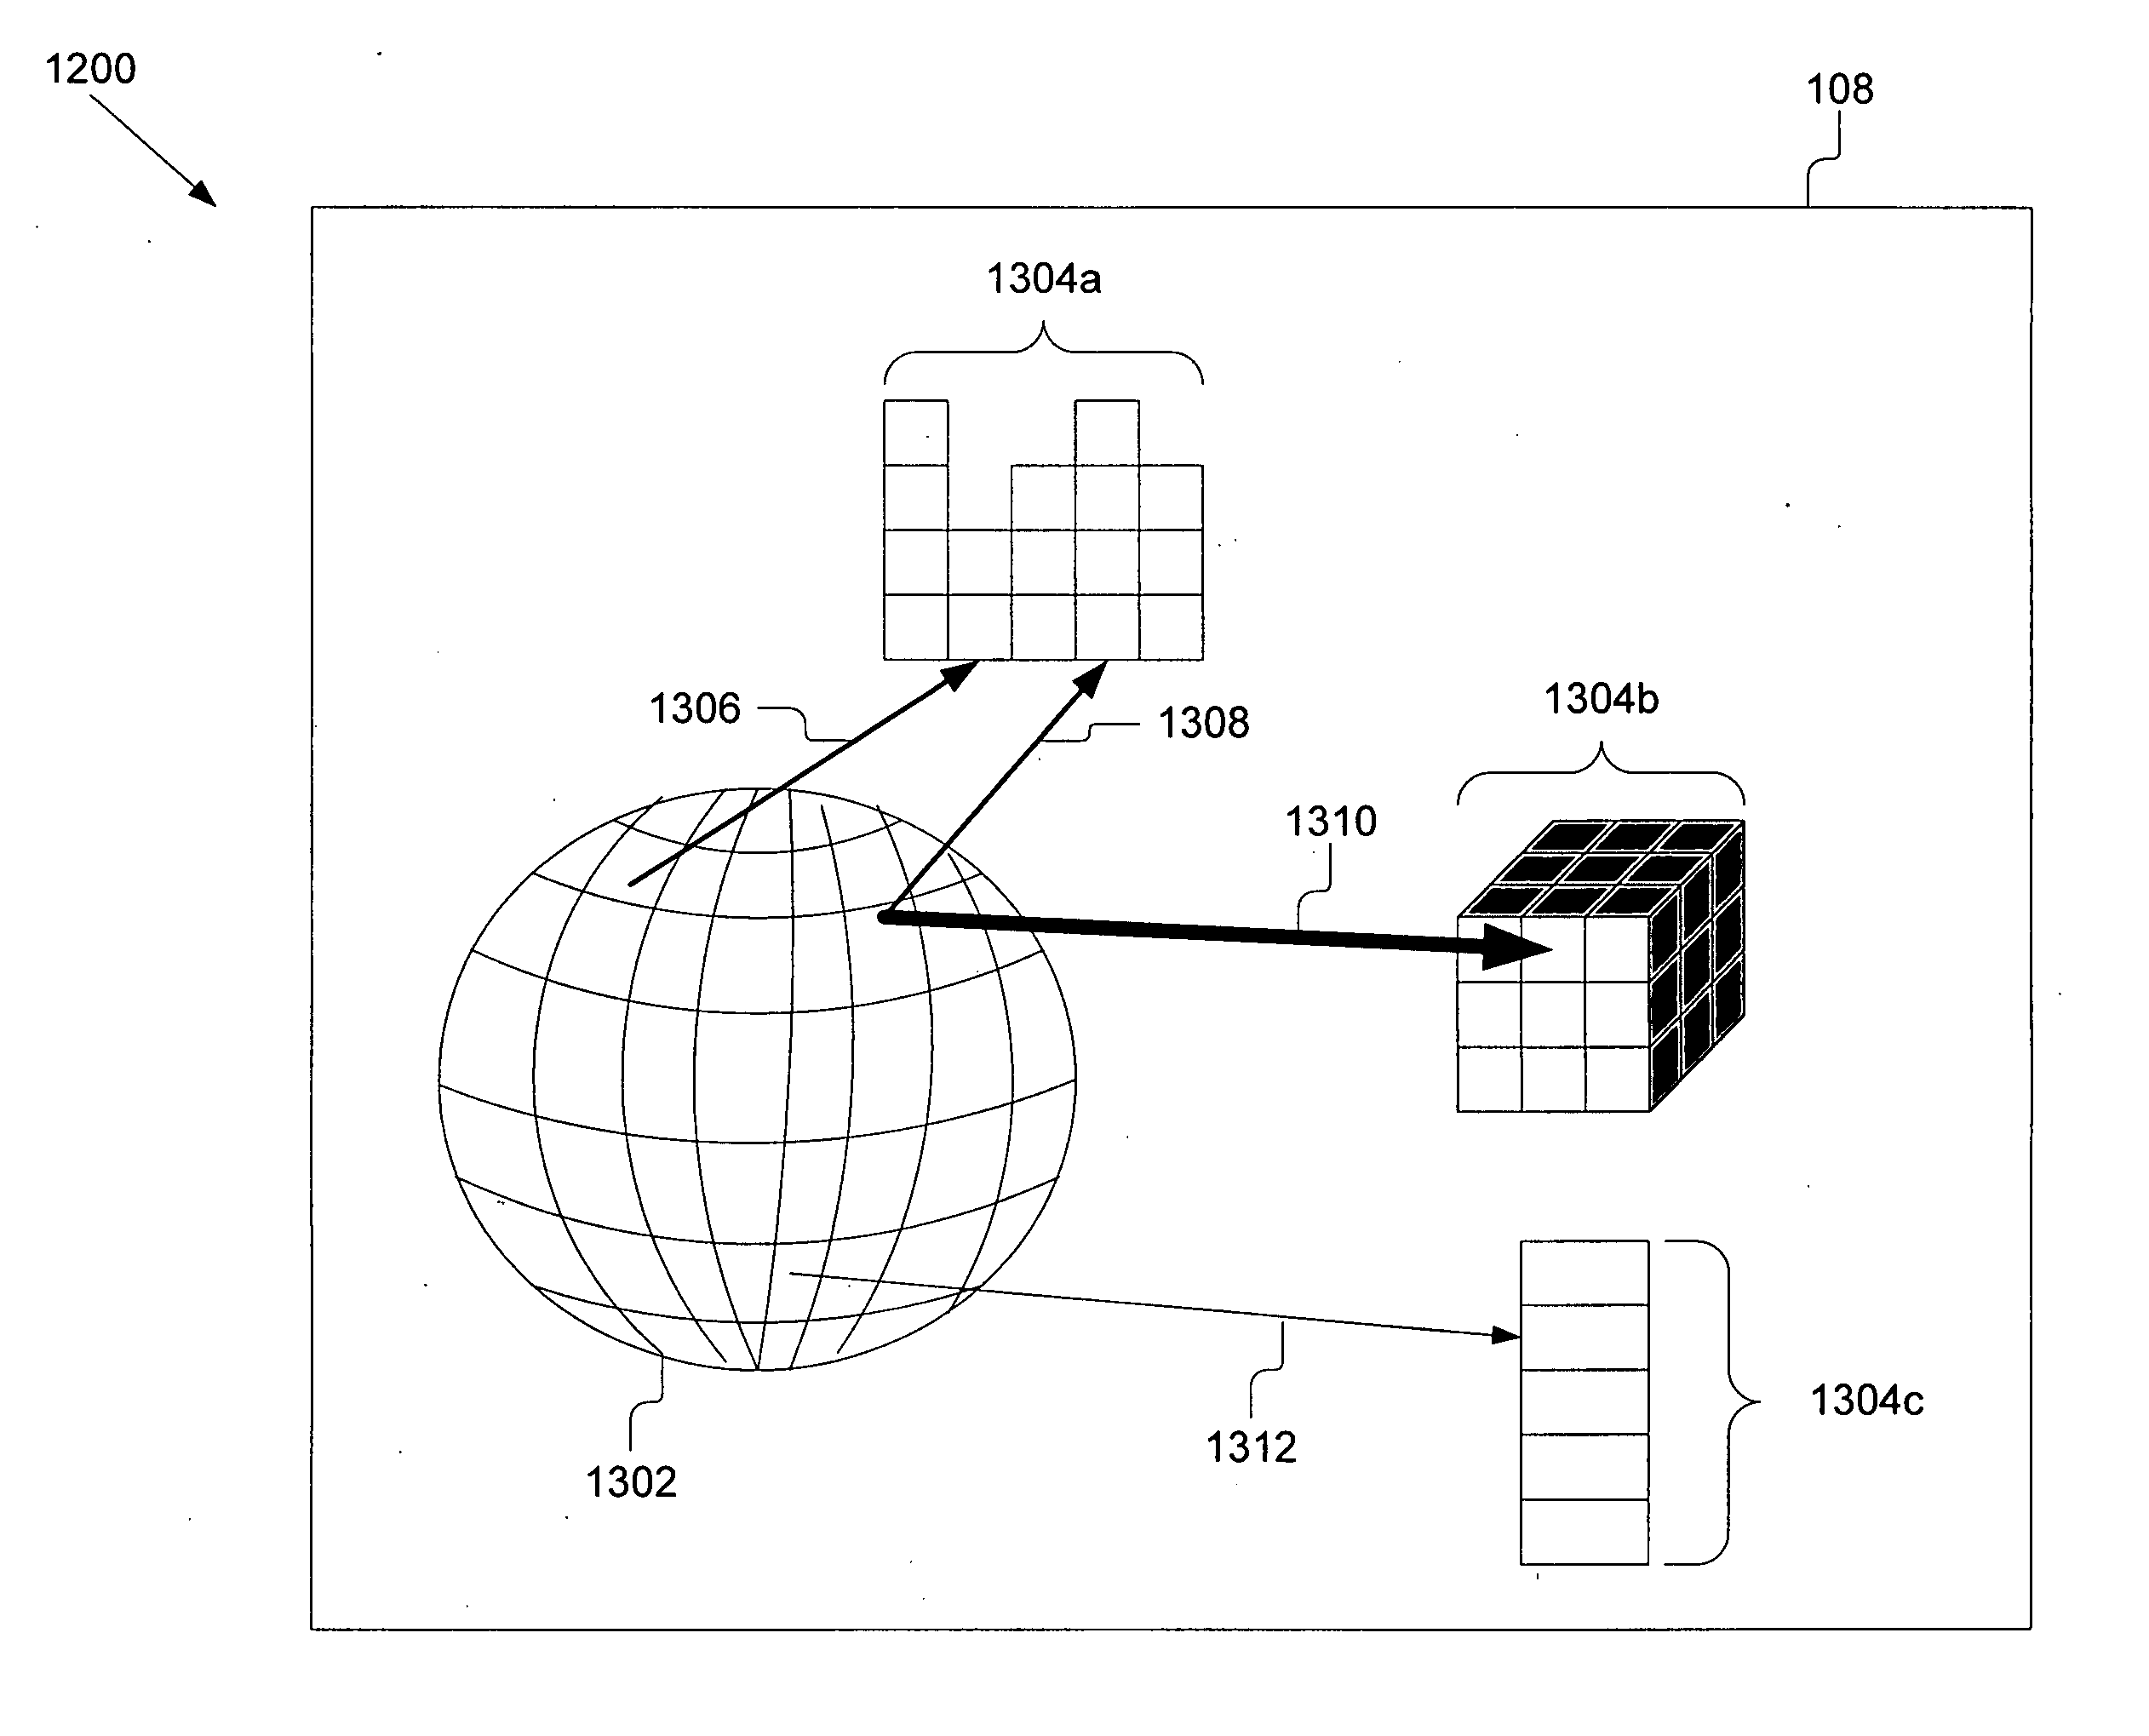 Systems and methods for displaying and querying heterogeneous sets of data